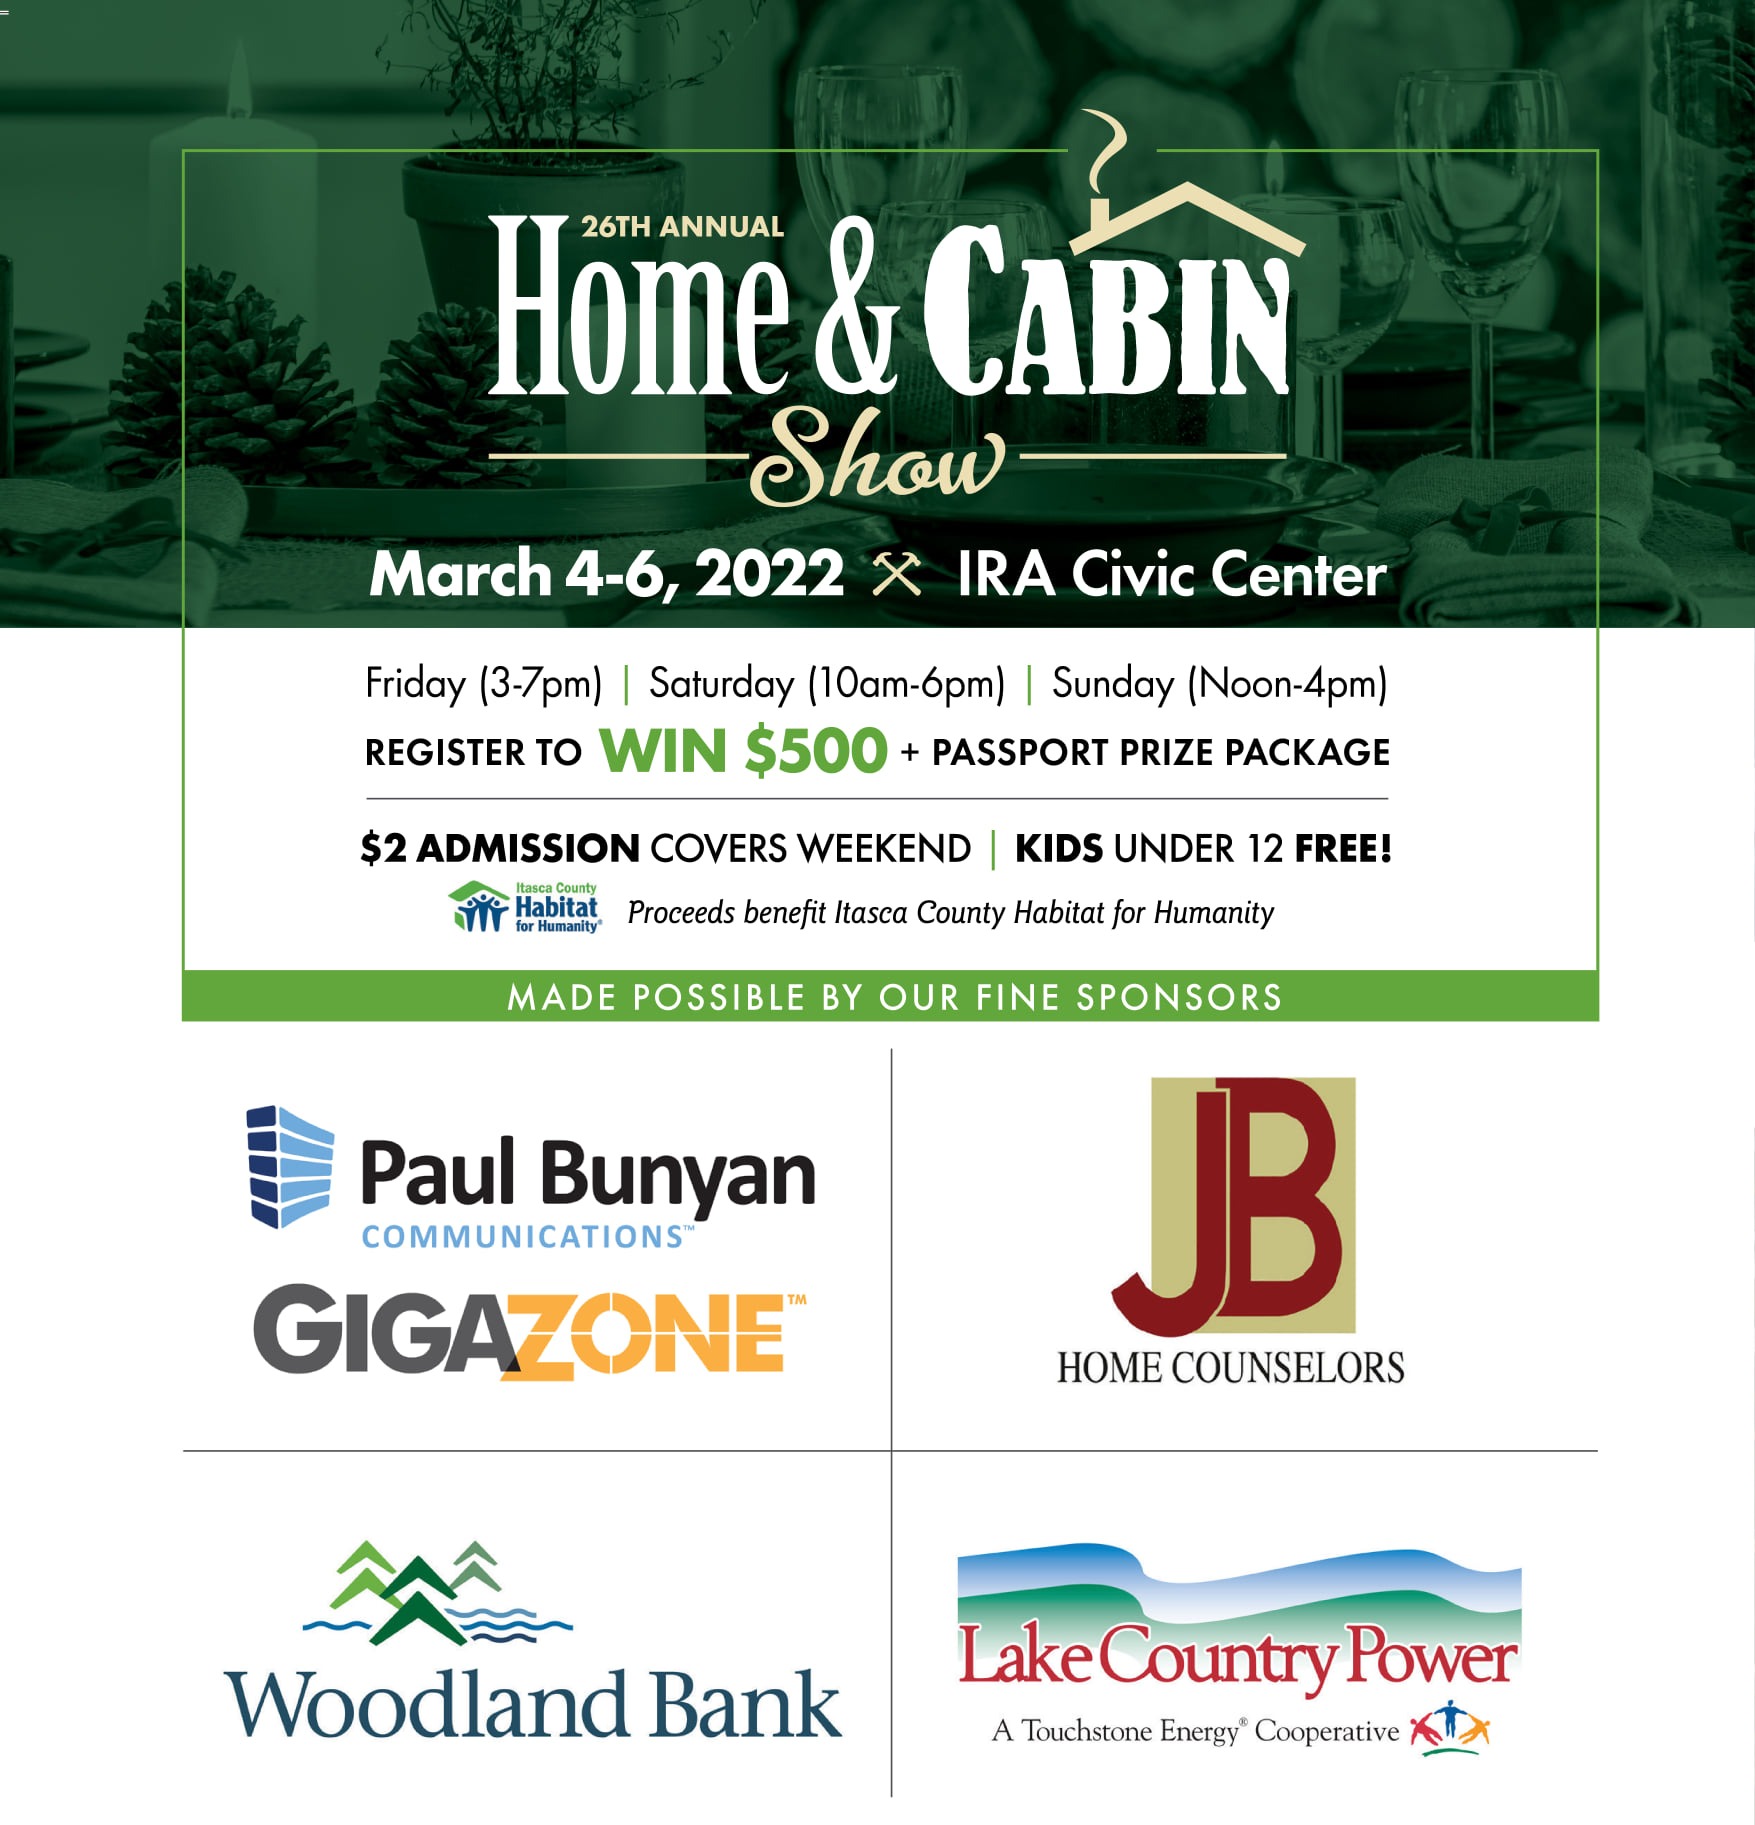 Builders Home Cabin Show Visit